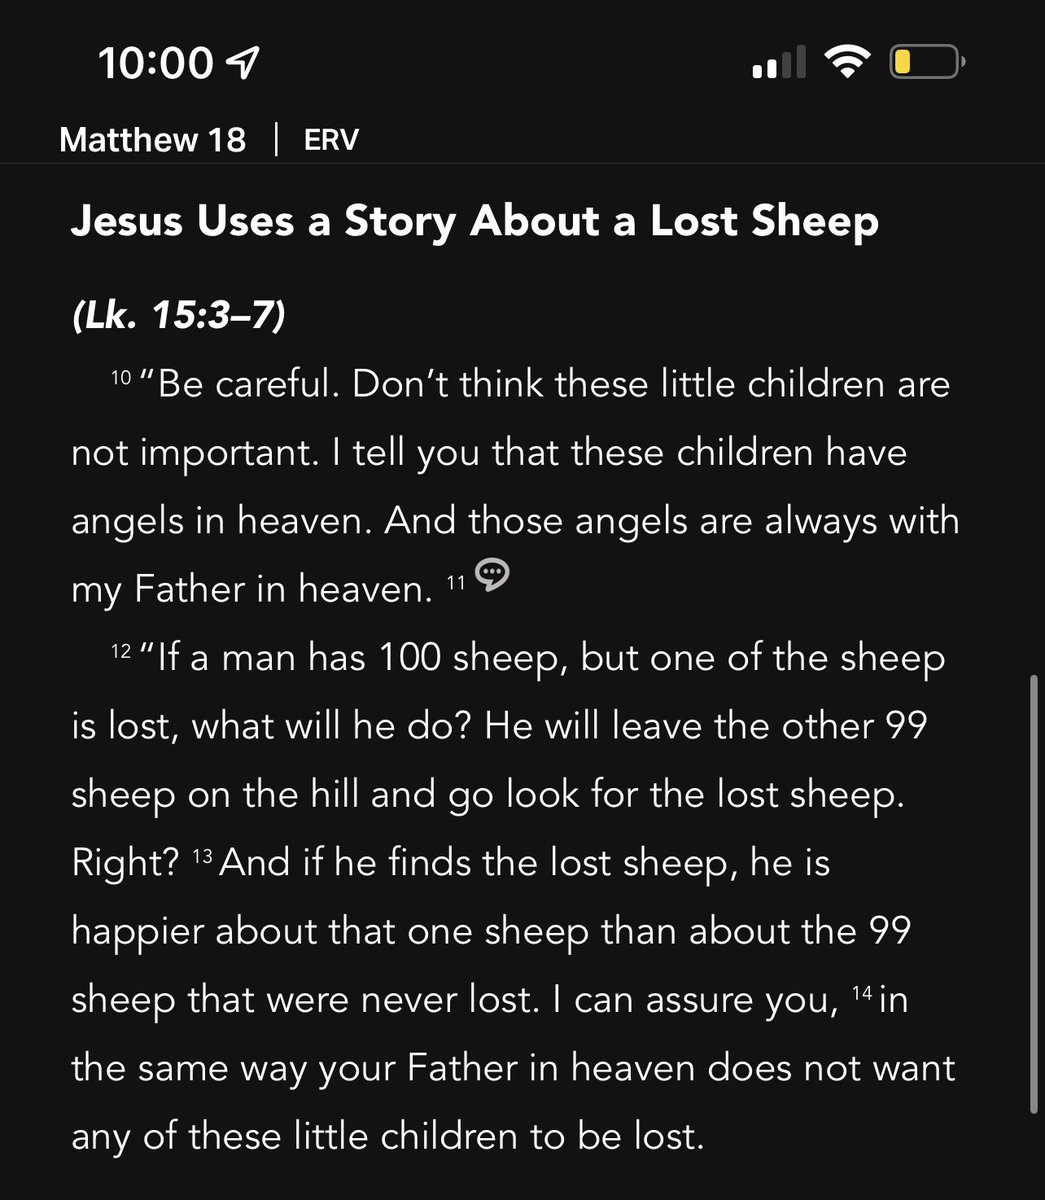 Do you feel like you’re suffocating? Are you depressed? Please remember this 
Jesus leaves the 99 to find the 1 lost sheep 🐑 #areyoulost #doyouneedhelp? #peace #neveralone #focusonGod